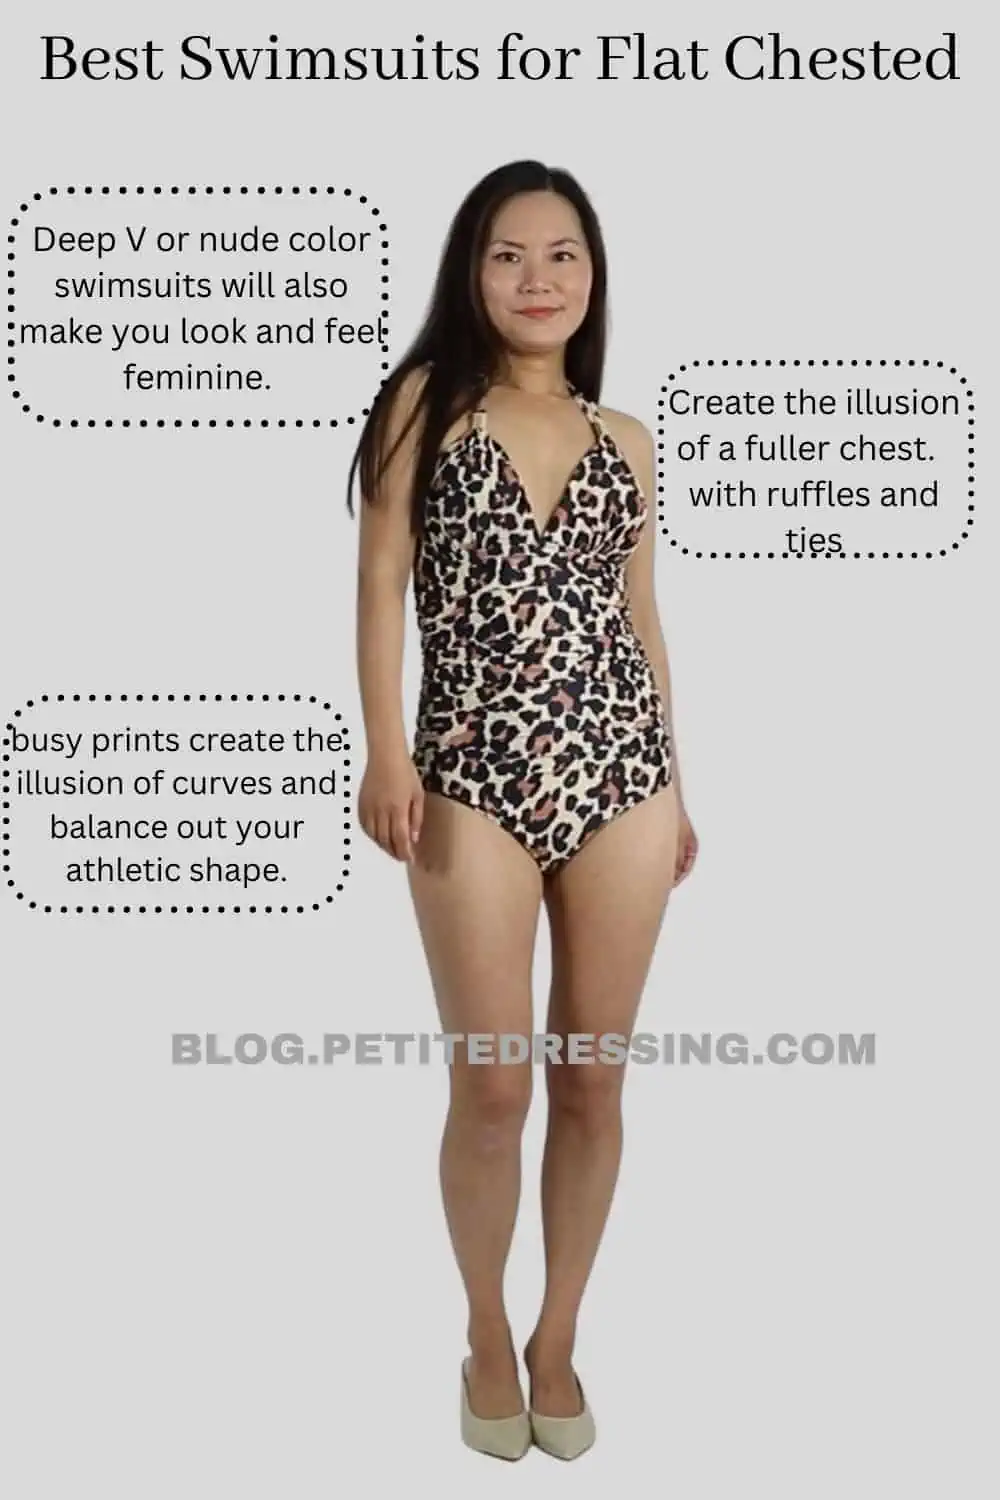 21 Best Swimsuits for Flat Chest - Petite Dressing